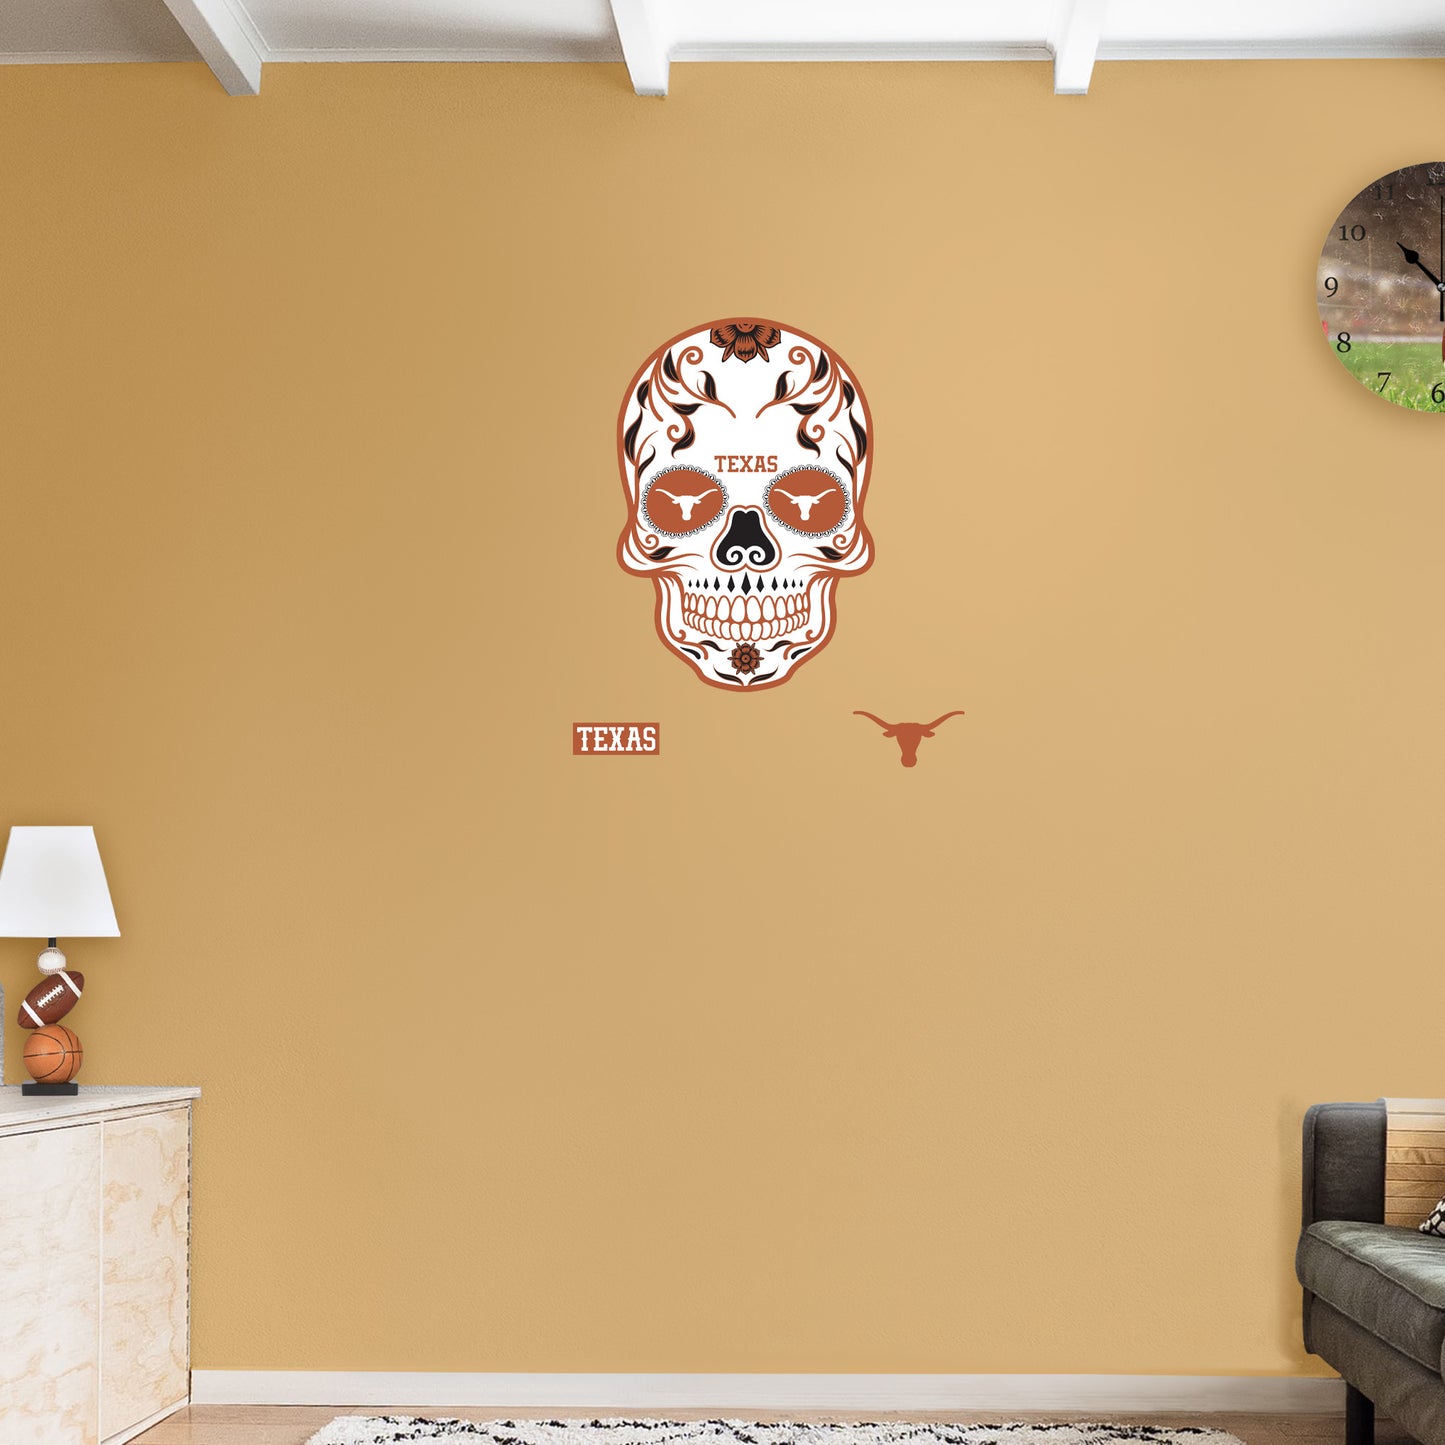 Texas Longhorns:   Skull        - Officially Licensed NCAA Removable     Adhesive Decal